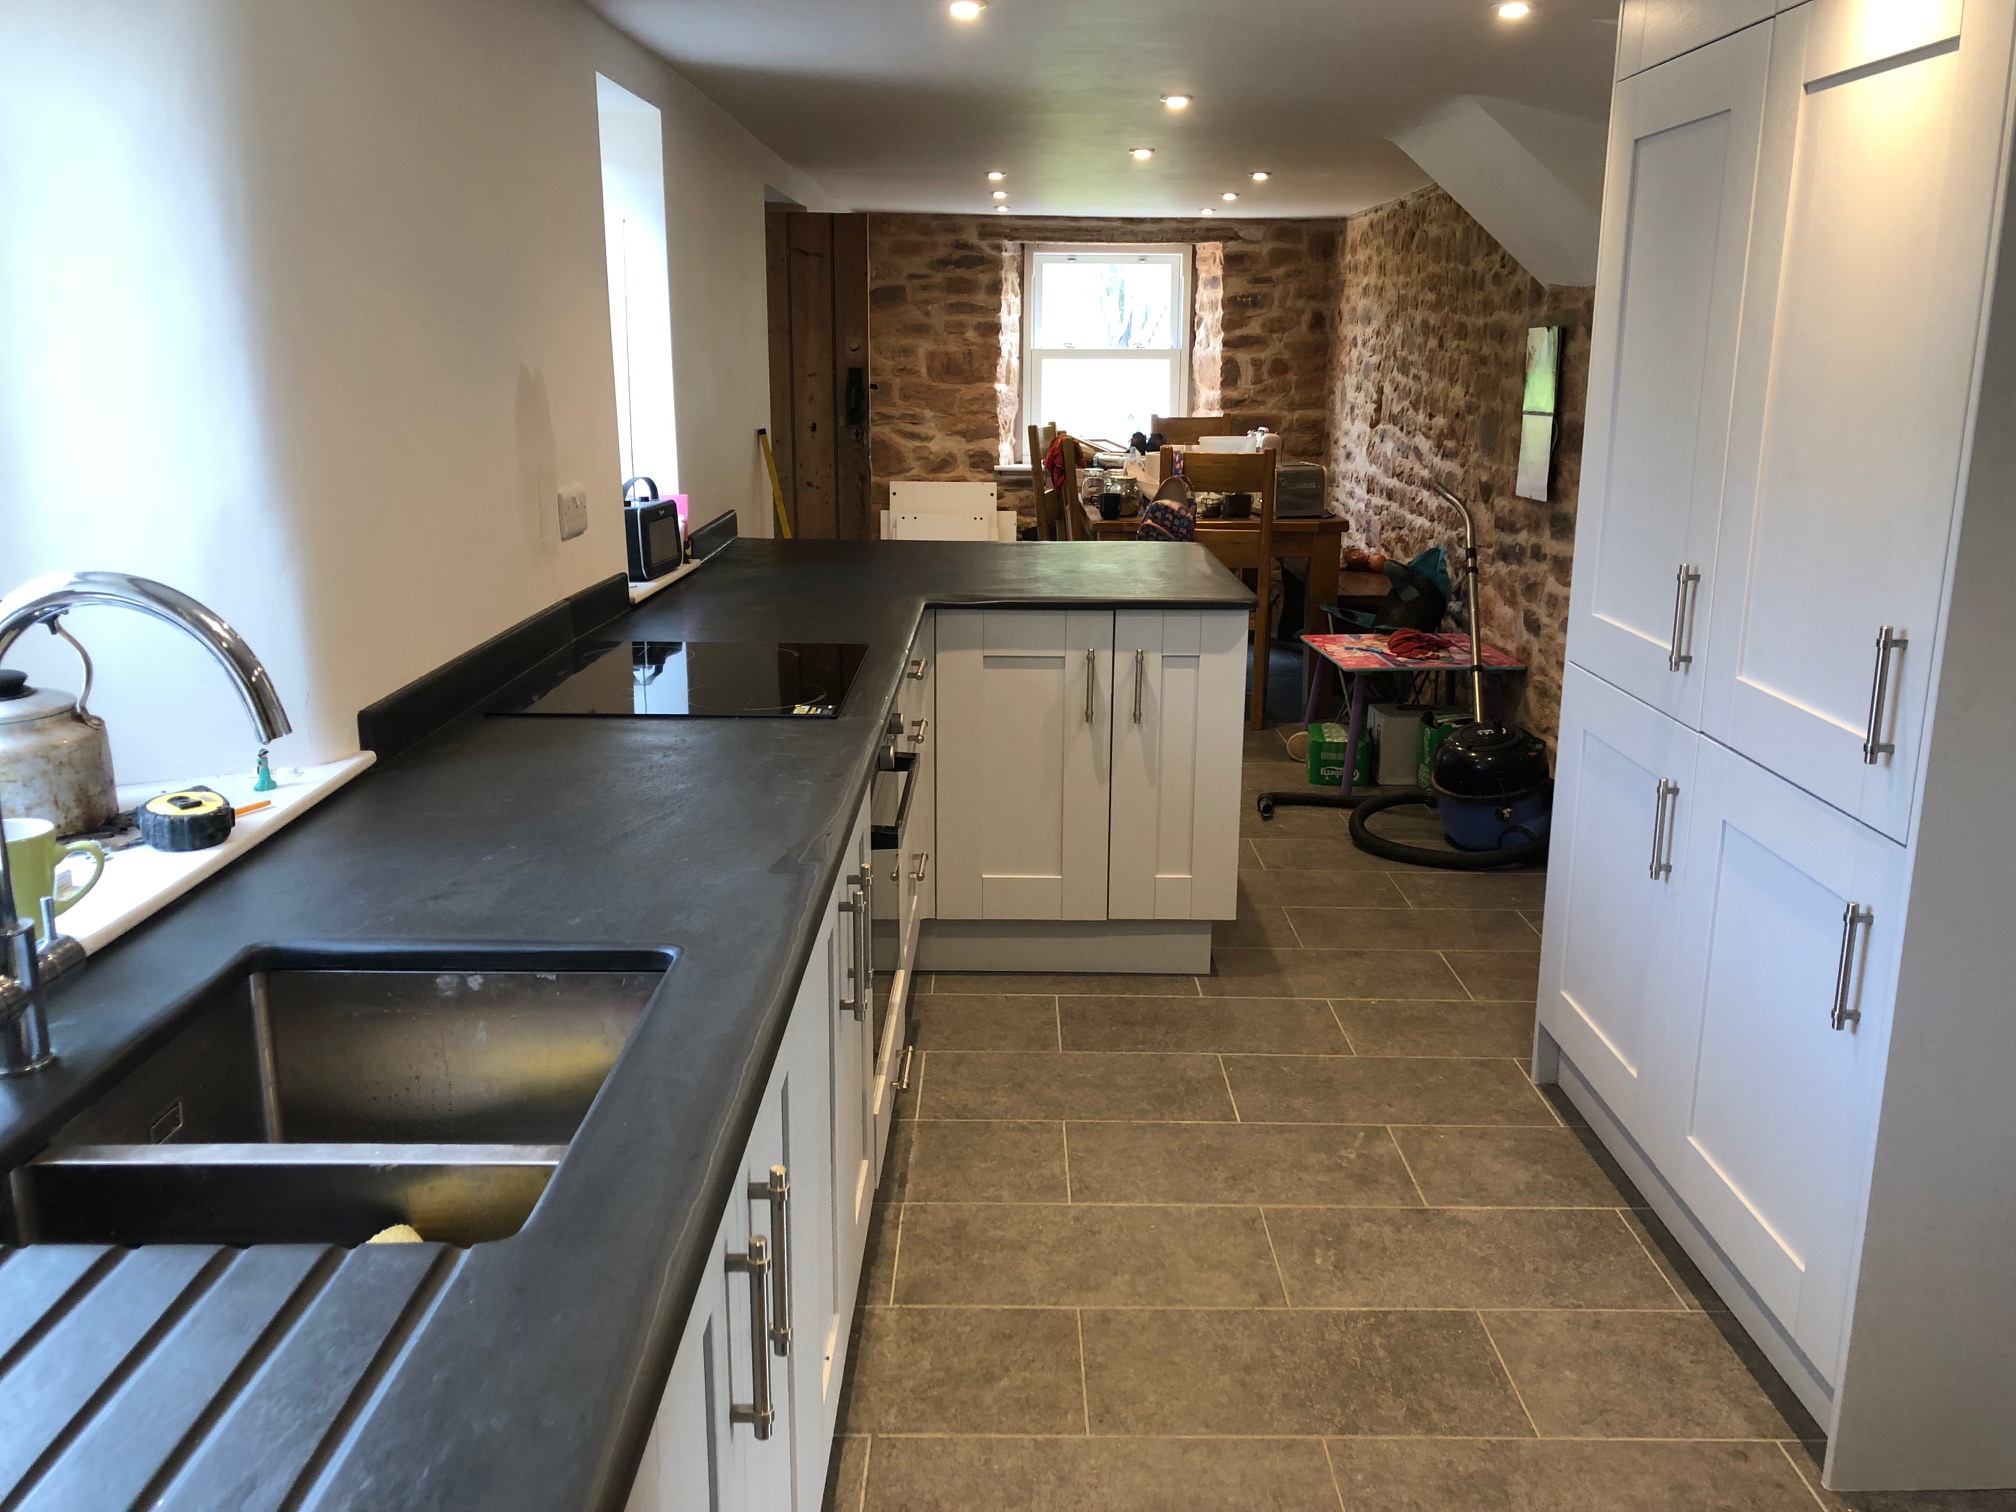 polished slate worktop in a modern cottage kitchen with an exposed stone wall